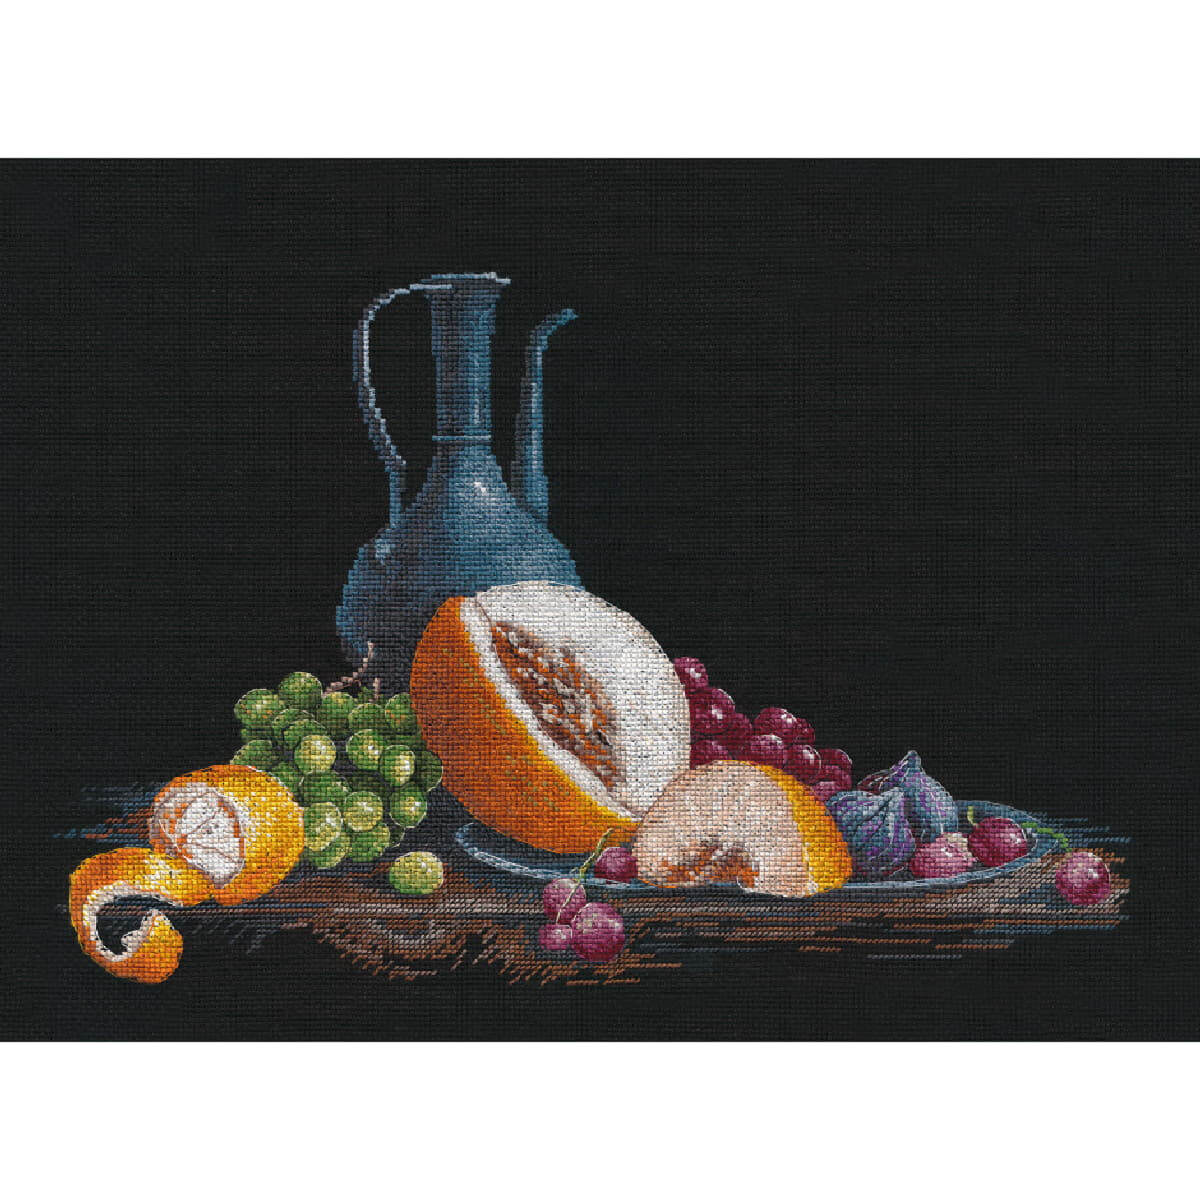 Oven counted cross stitch kit "Still life with...